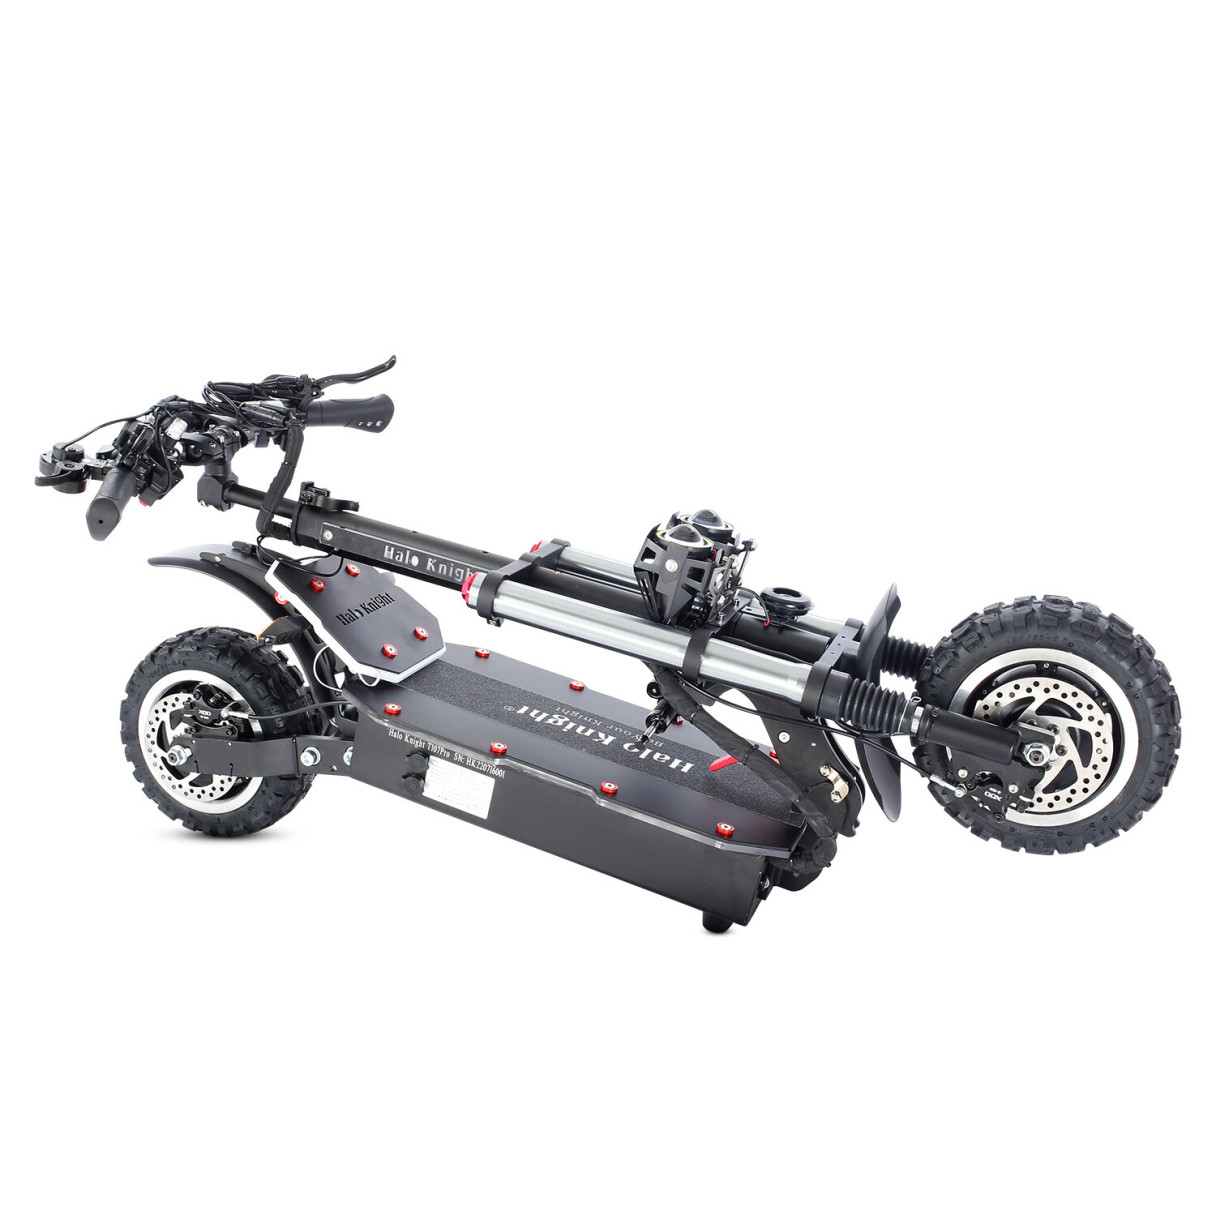 [EU DIRECT] Halo Knight T107 Pro Electric Scooter 60V 38.4Ah 6000W Dual Motor 11inch Foldable Electric Scooter 80km Mileage 200kg Max Load EU Plug